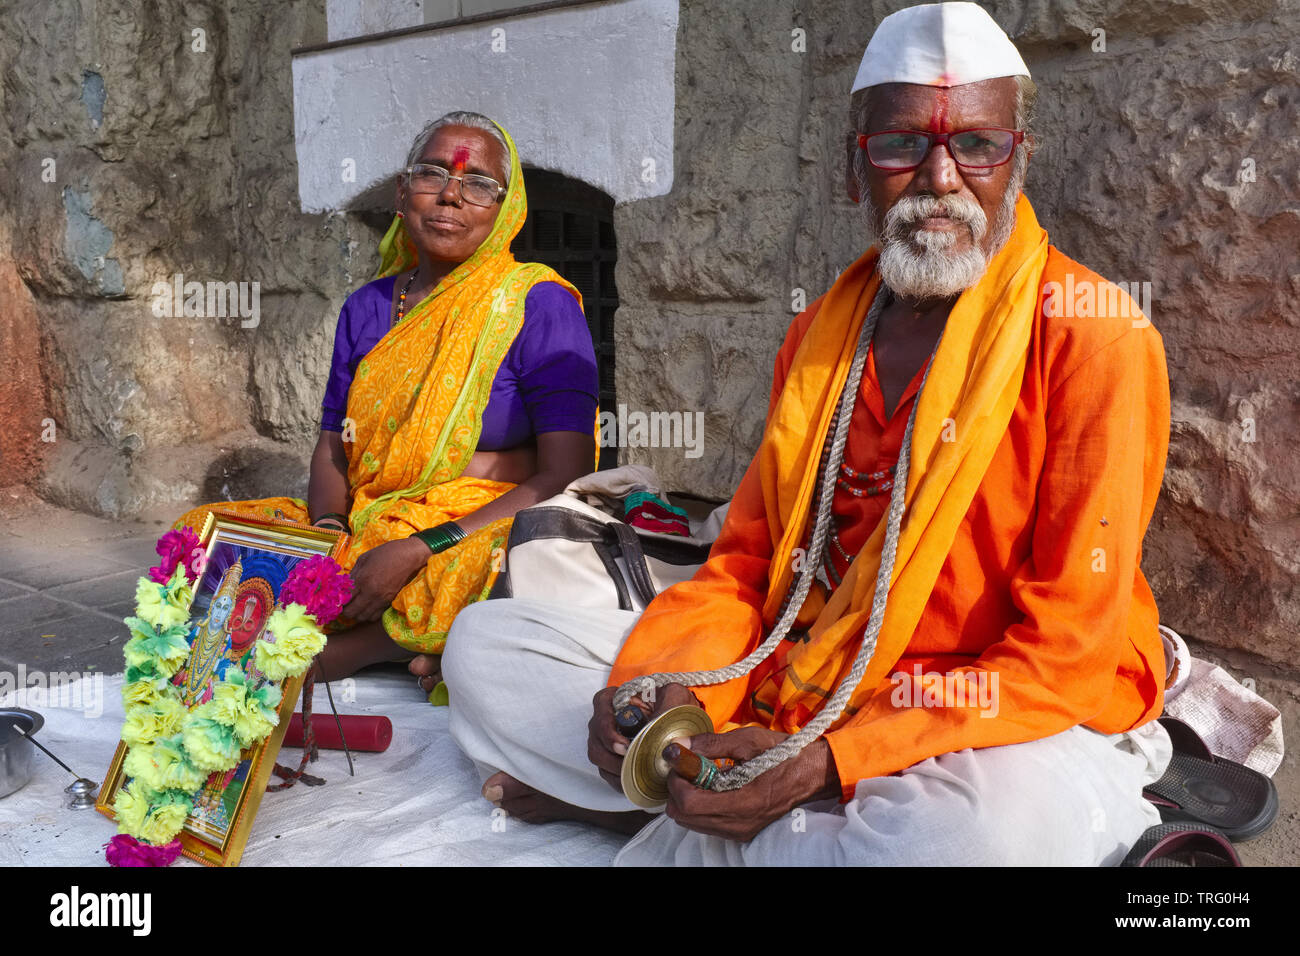 A married couple of itinerant devotional (Hindu) singers, in Mumbai, India, soliciting donations at various locations in the Bhuleshwar business area Stock Photo